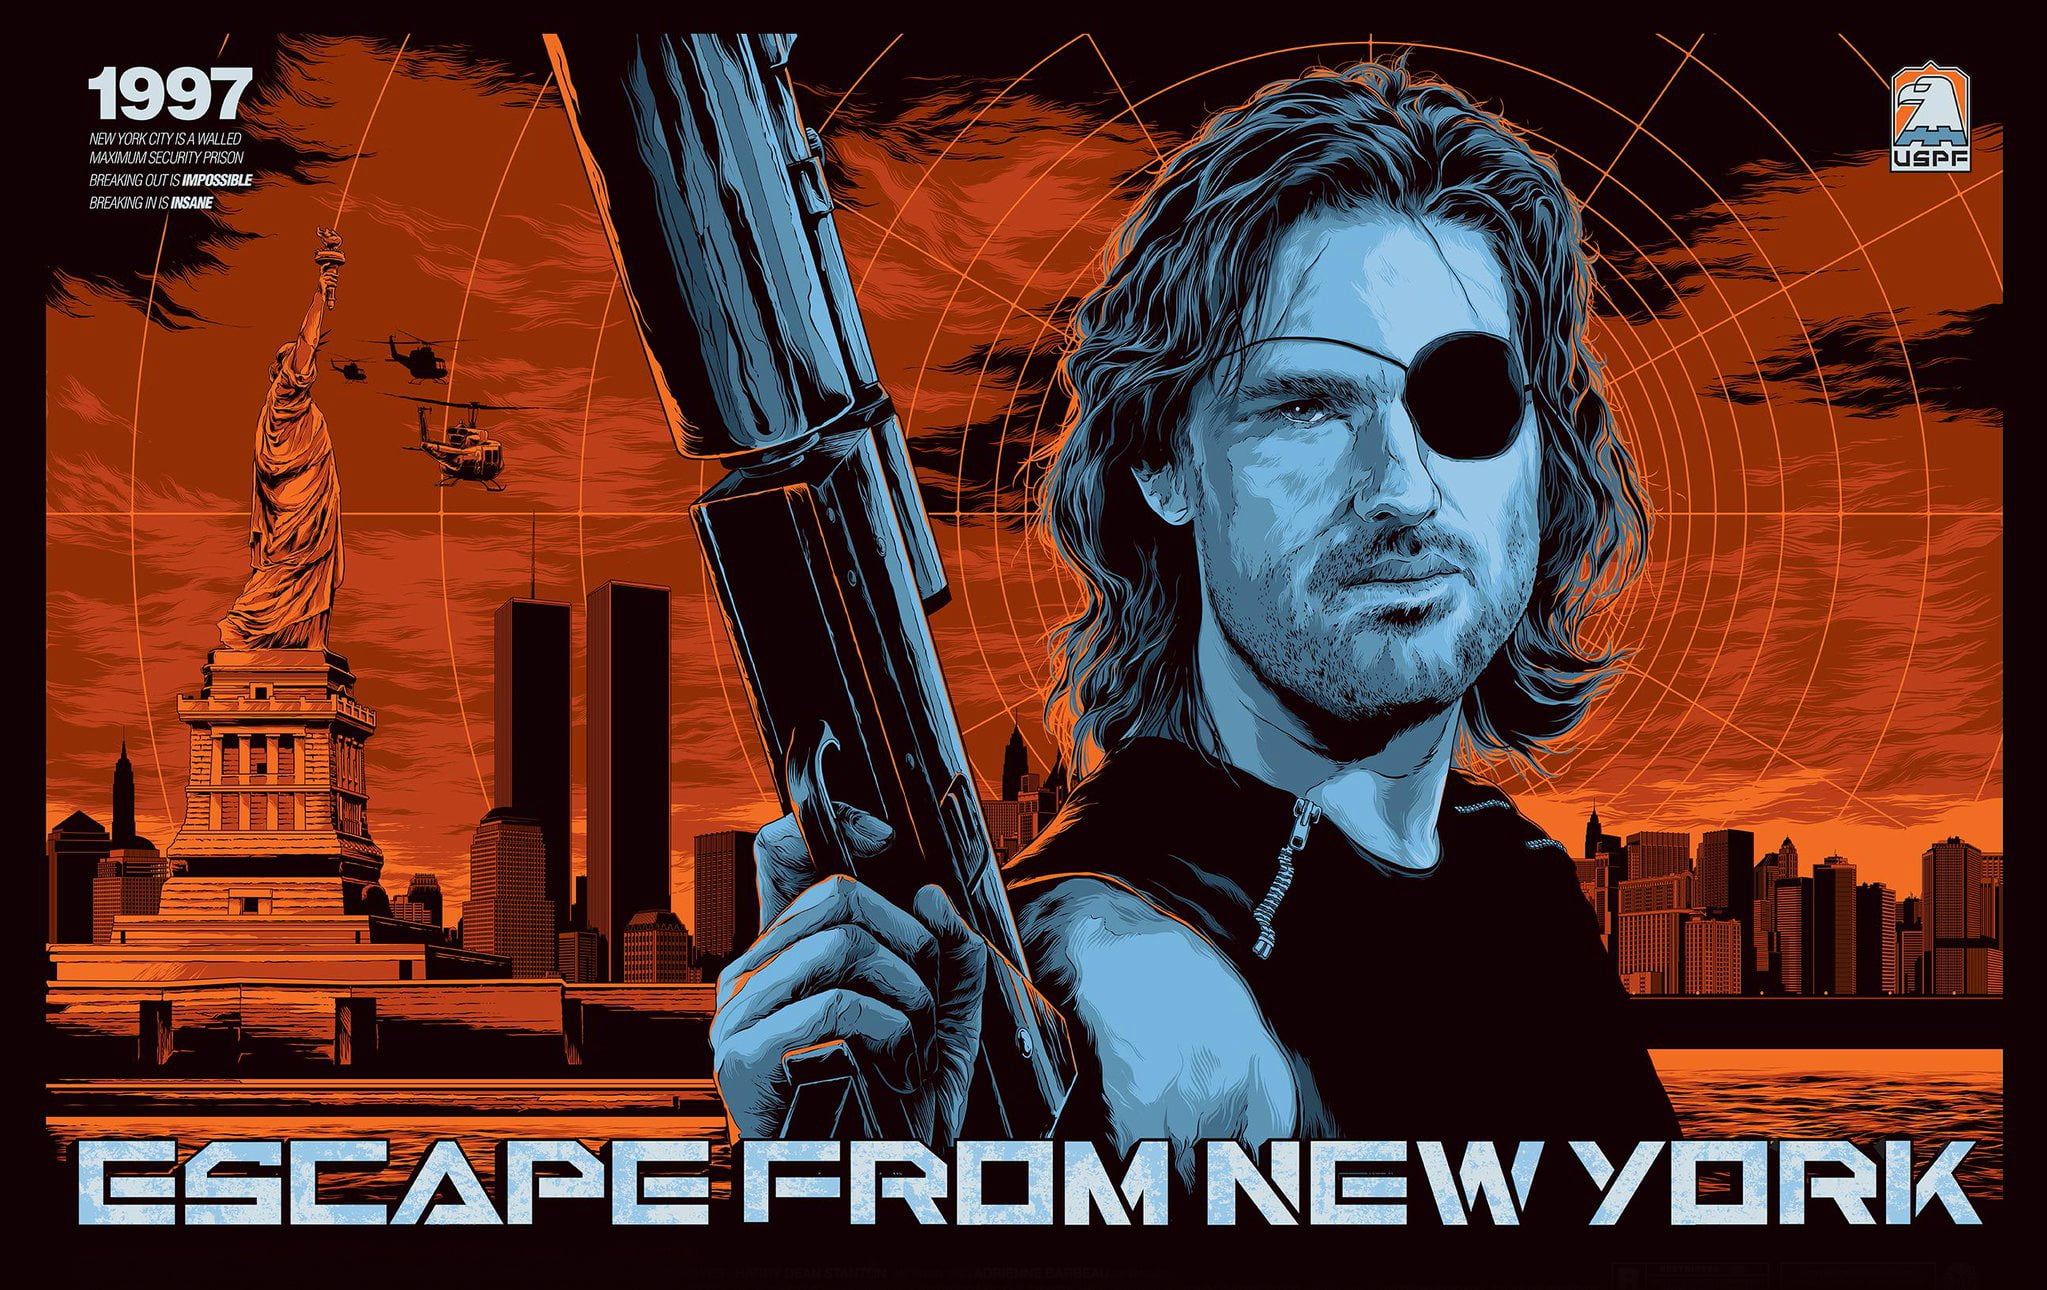 movies, artwork, Escape from New York